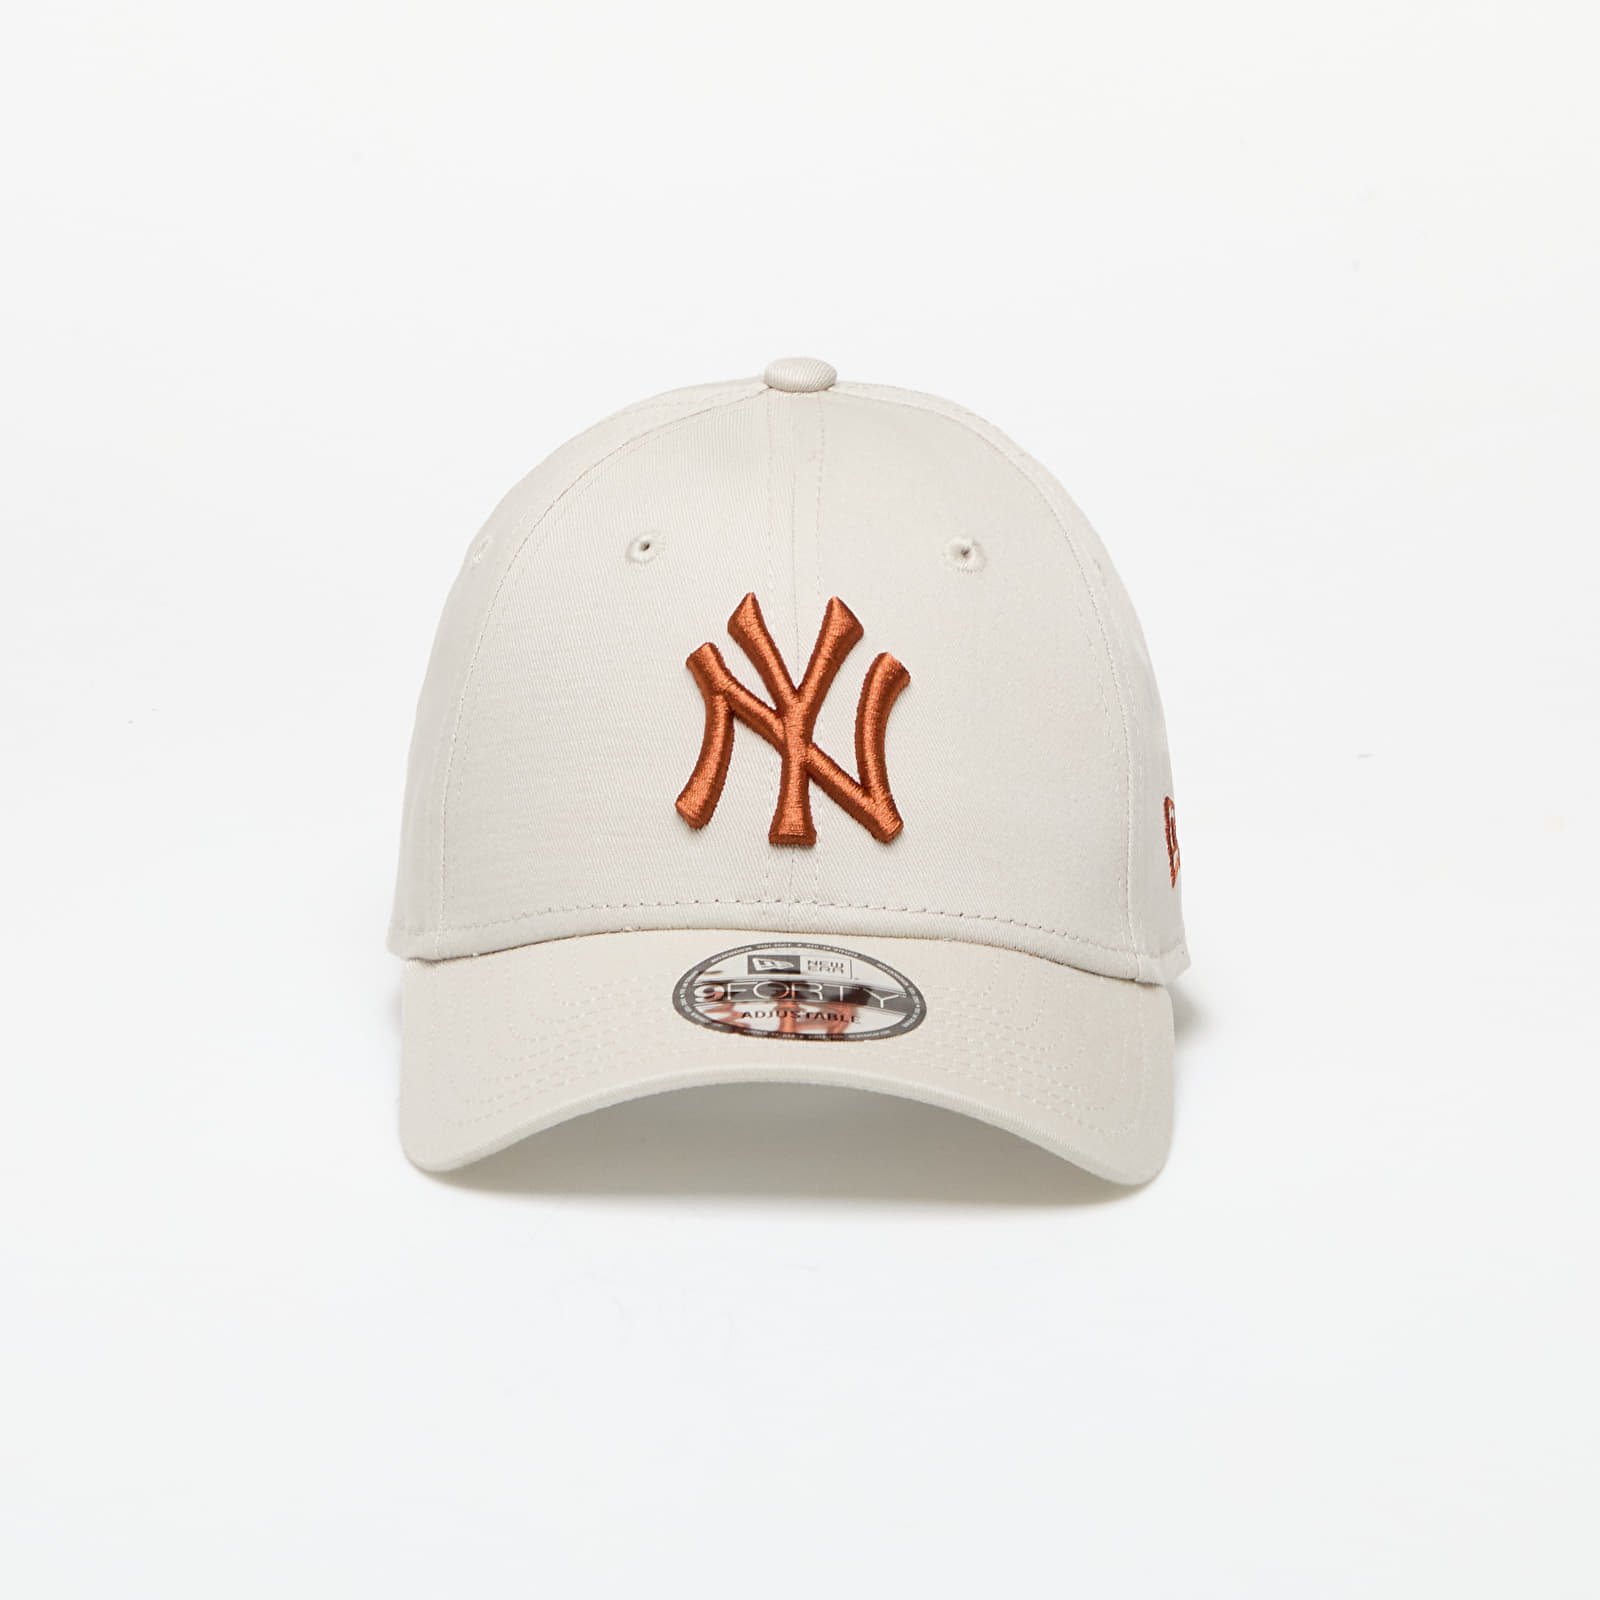 New York Yankees League Essential 9FORTY Adjustable Cap